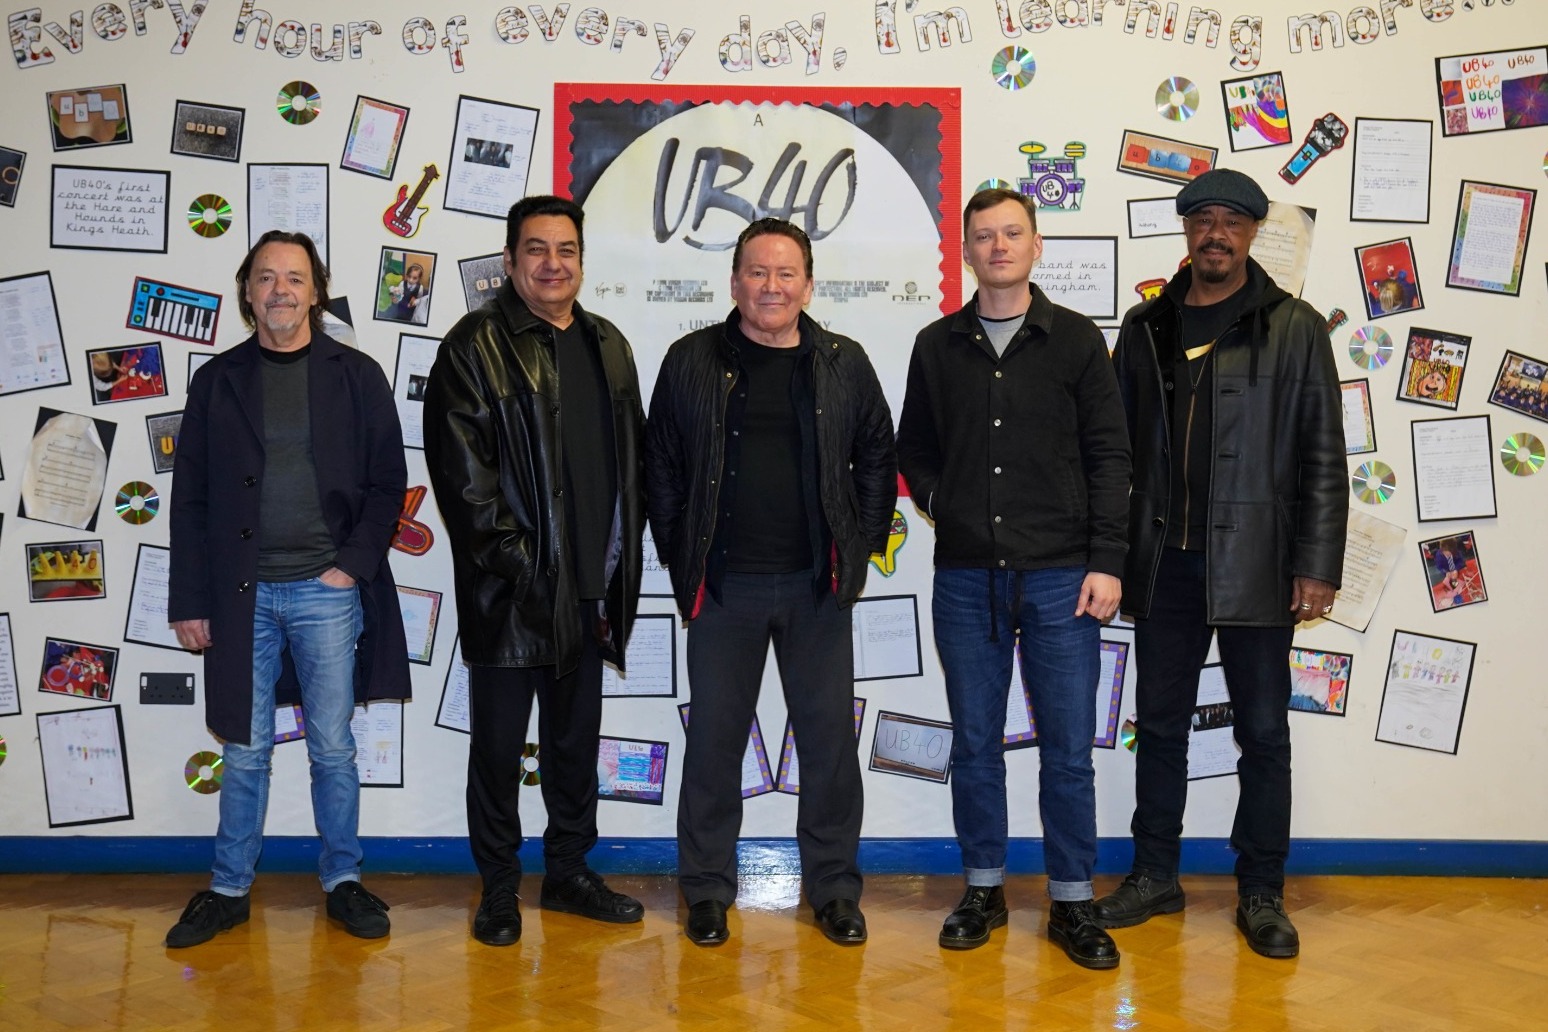 UB40 release first single from forthcoming album 